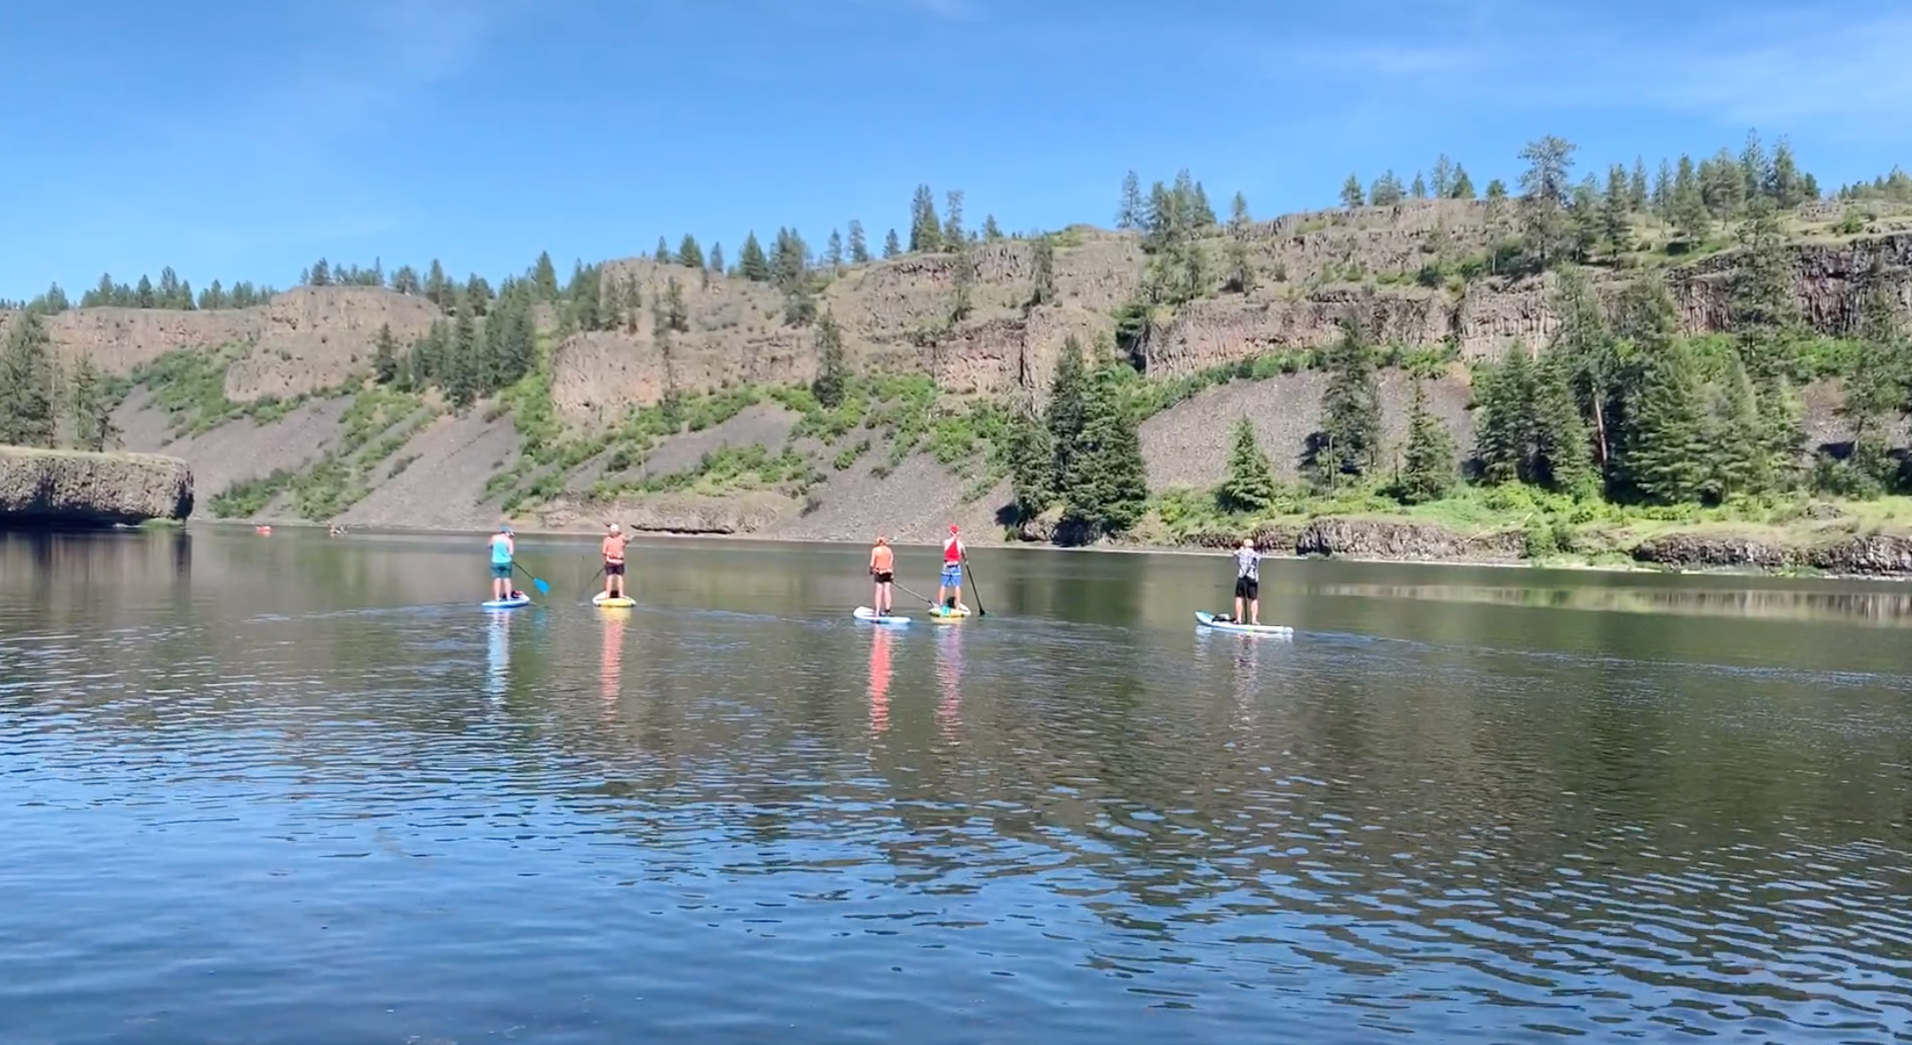 A group of people paddle-boarding on a lake.